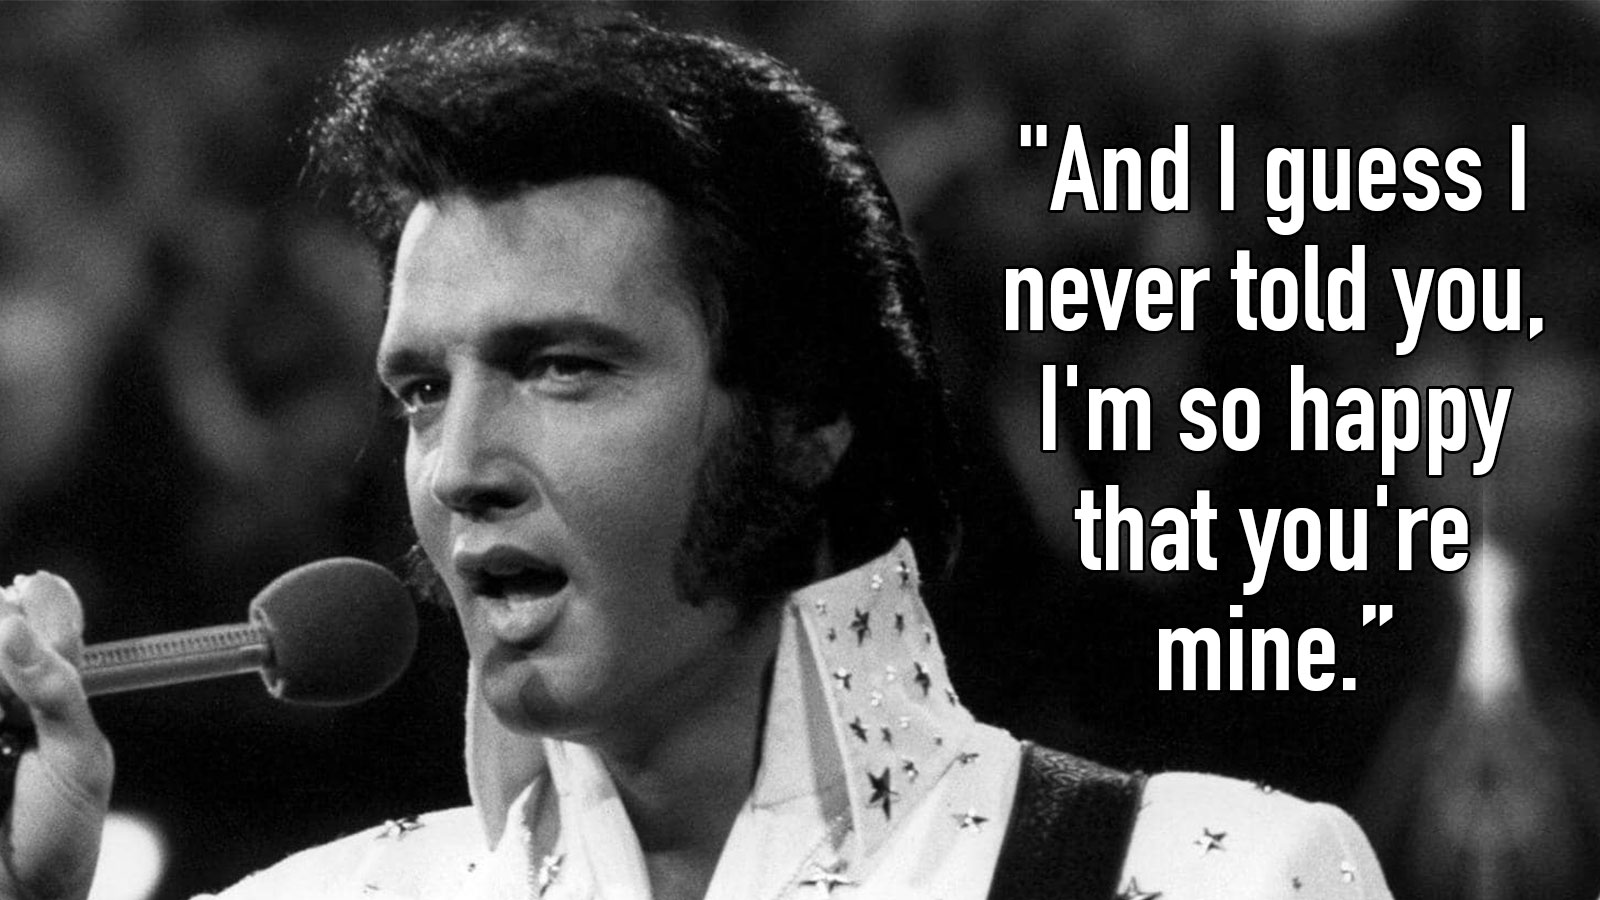 Can You Guess the Elvis Presley Song This Lyric Is From? Quiz 131